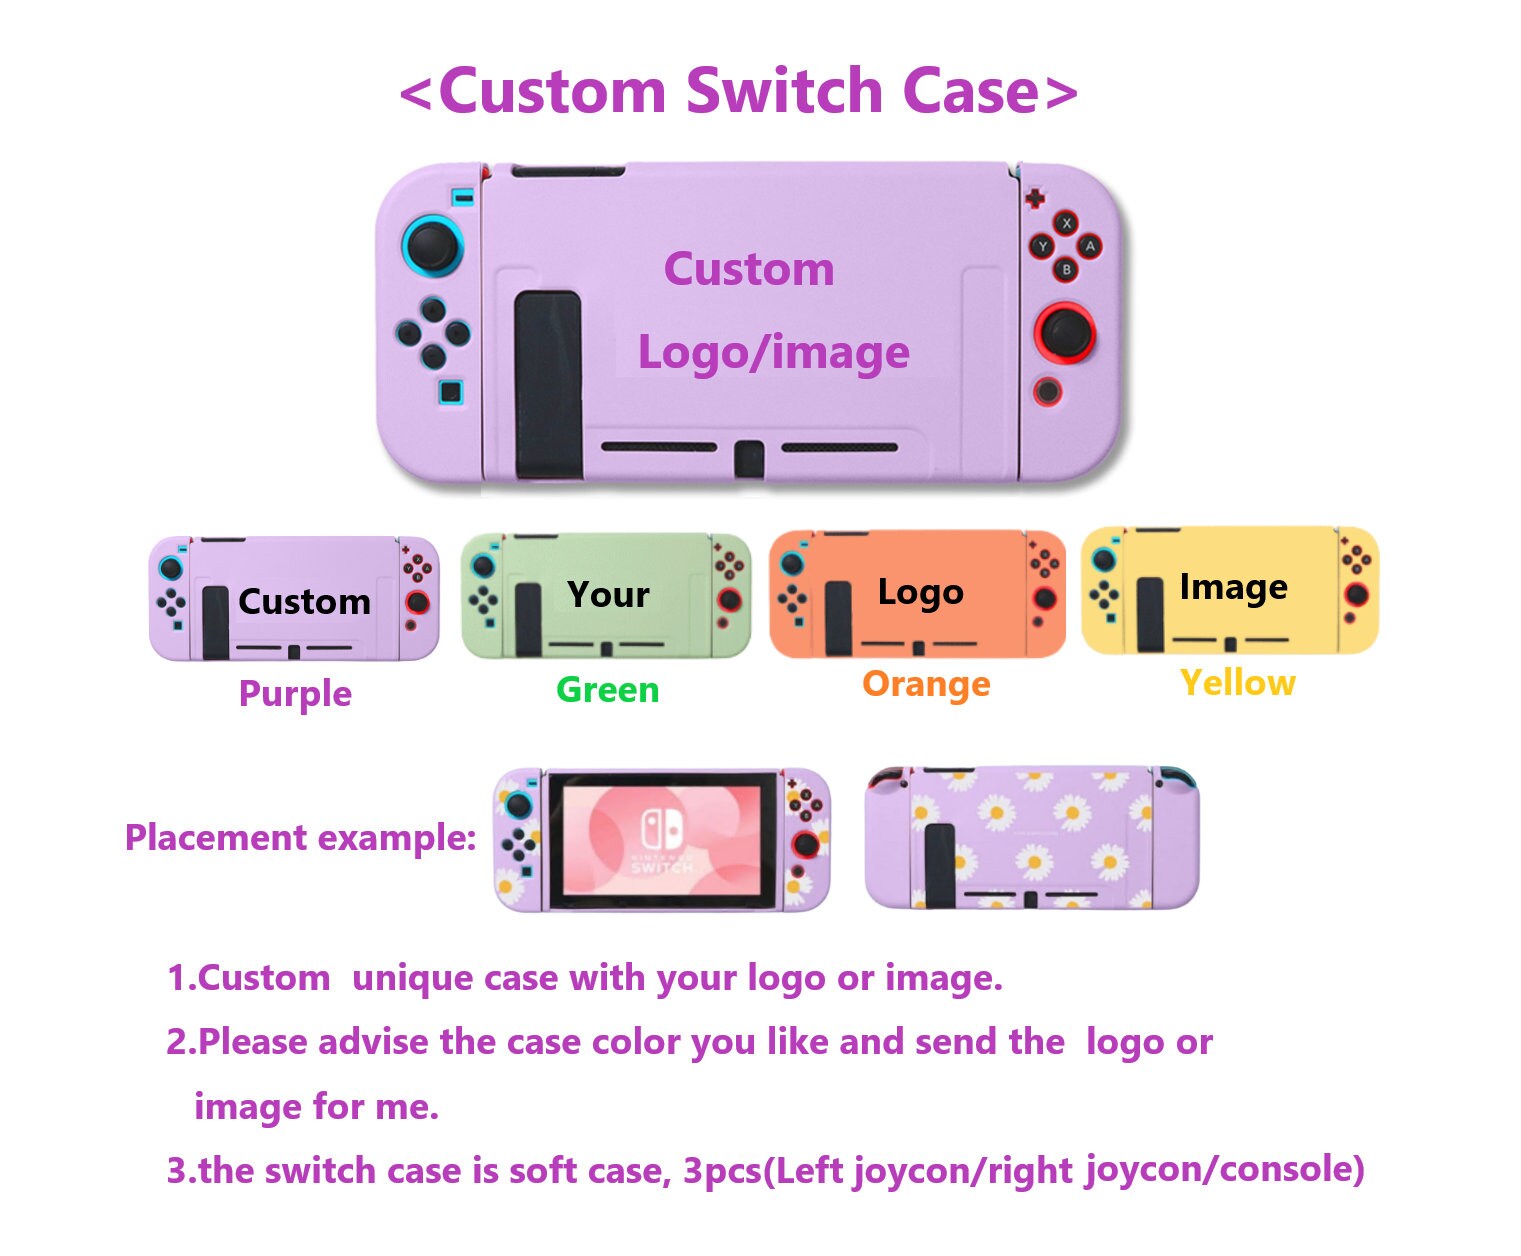 Disney Stitch Soft TPU Skin Protective Case for Nintendo Switch NS Joy-Con  Controller Protection Back